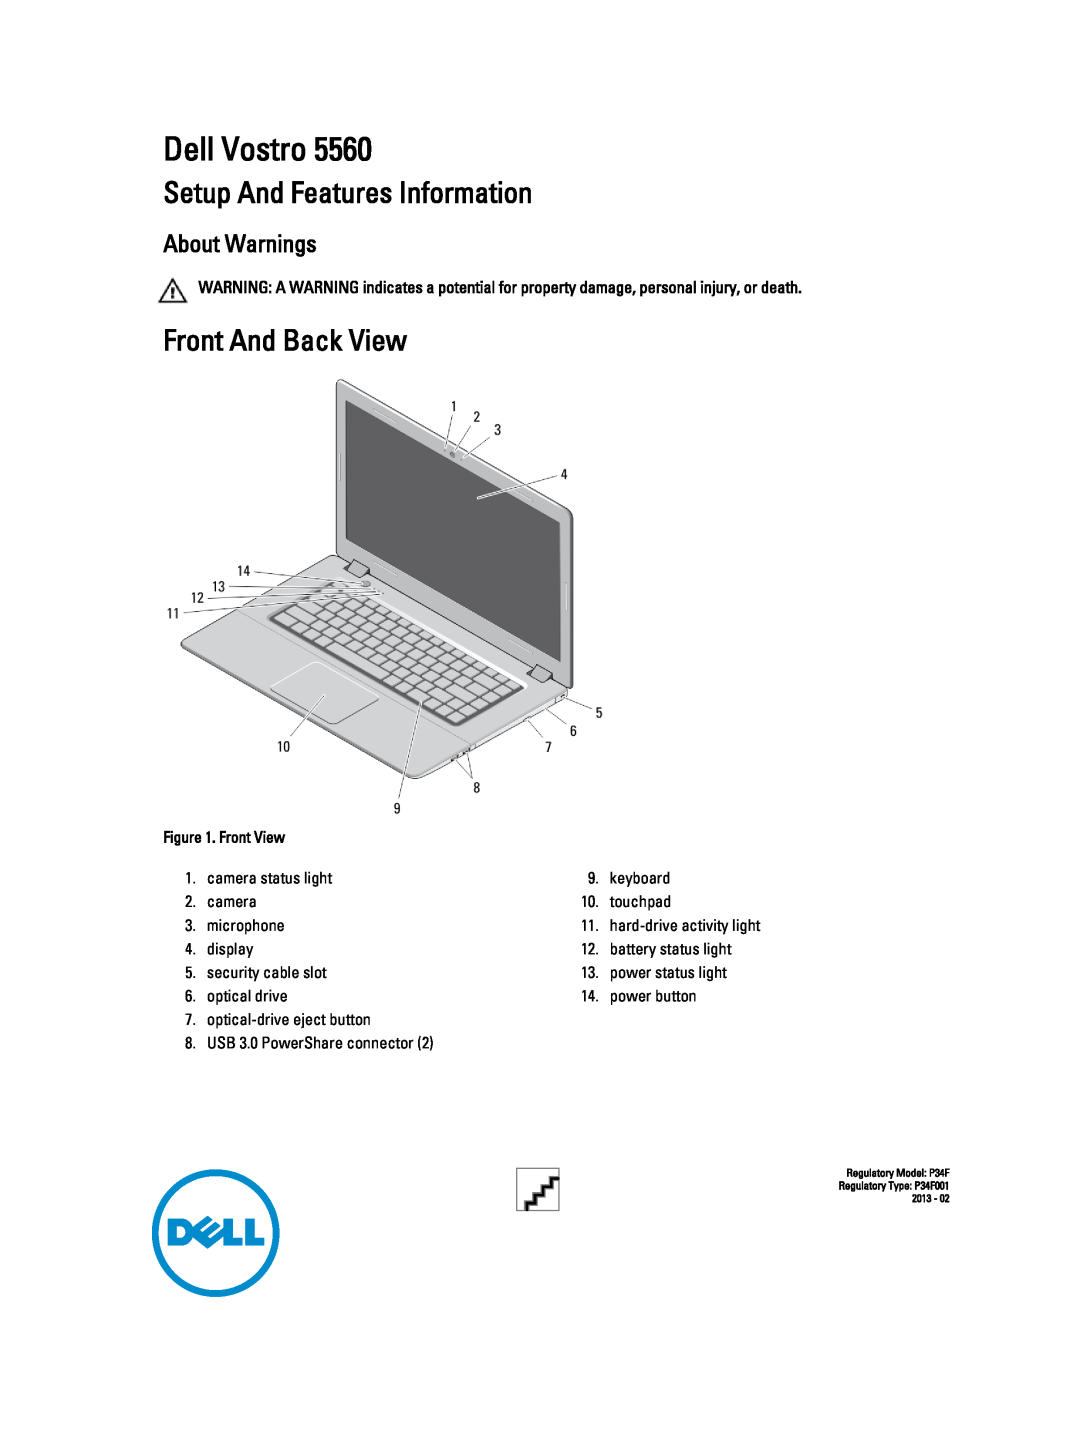 Dell 5560 manual Setup And Features Information, Front And Back View, Dell Vostro, About Warnings 